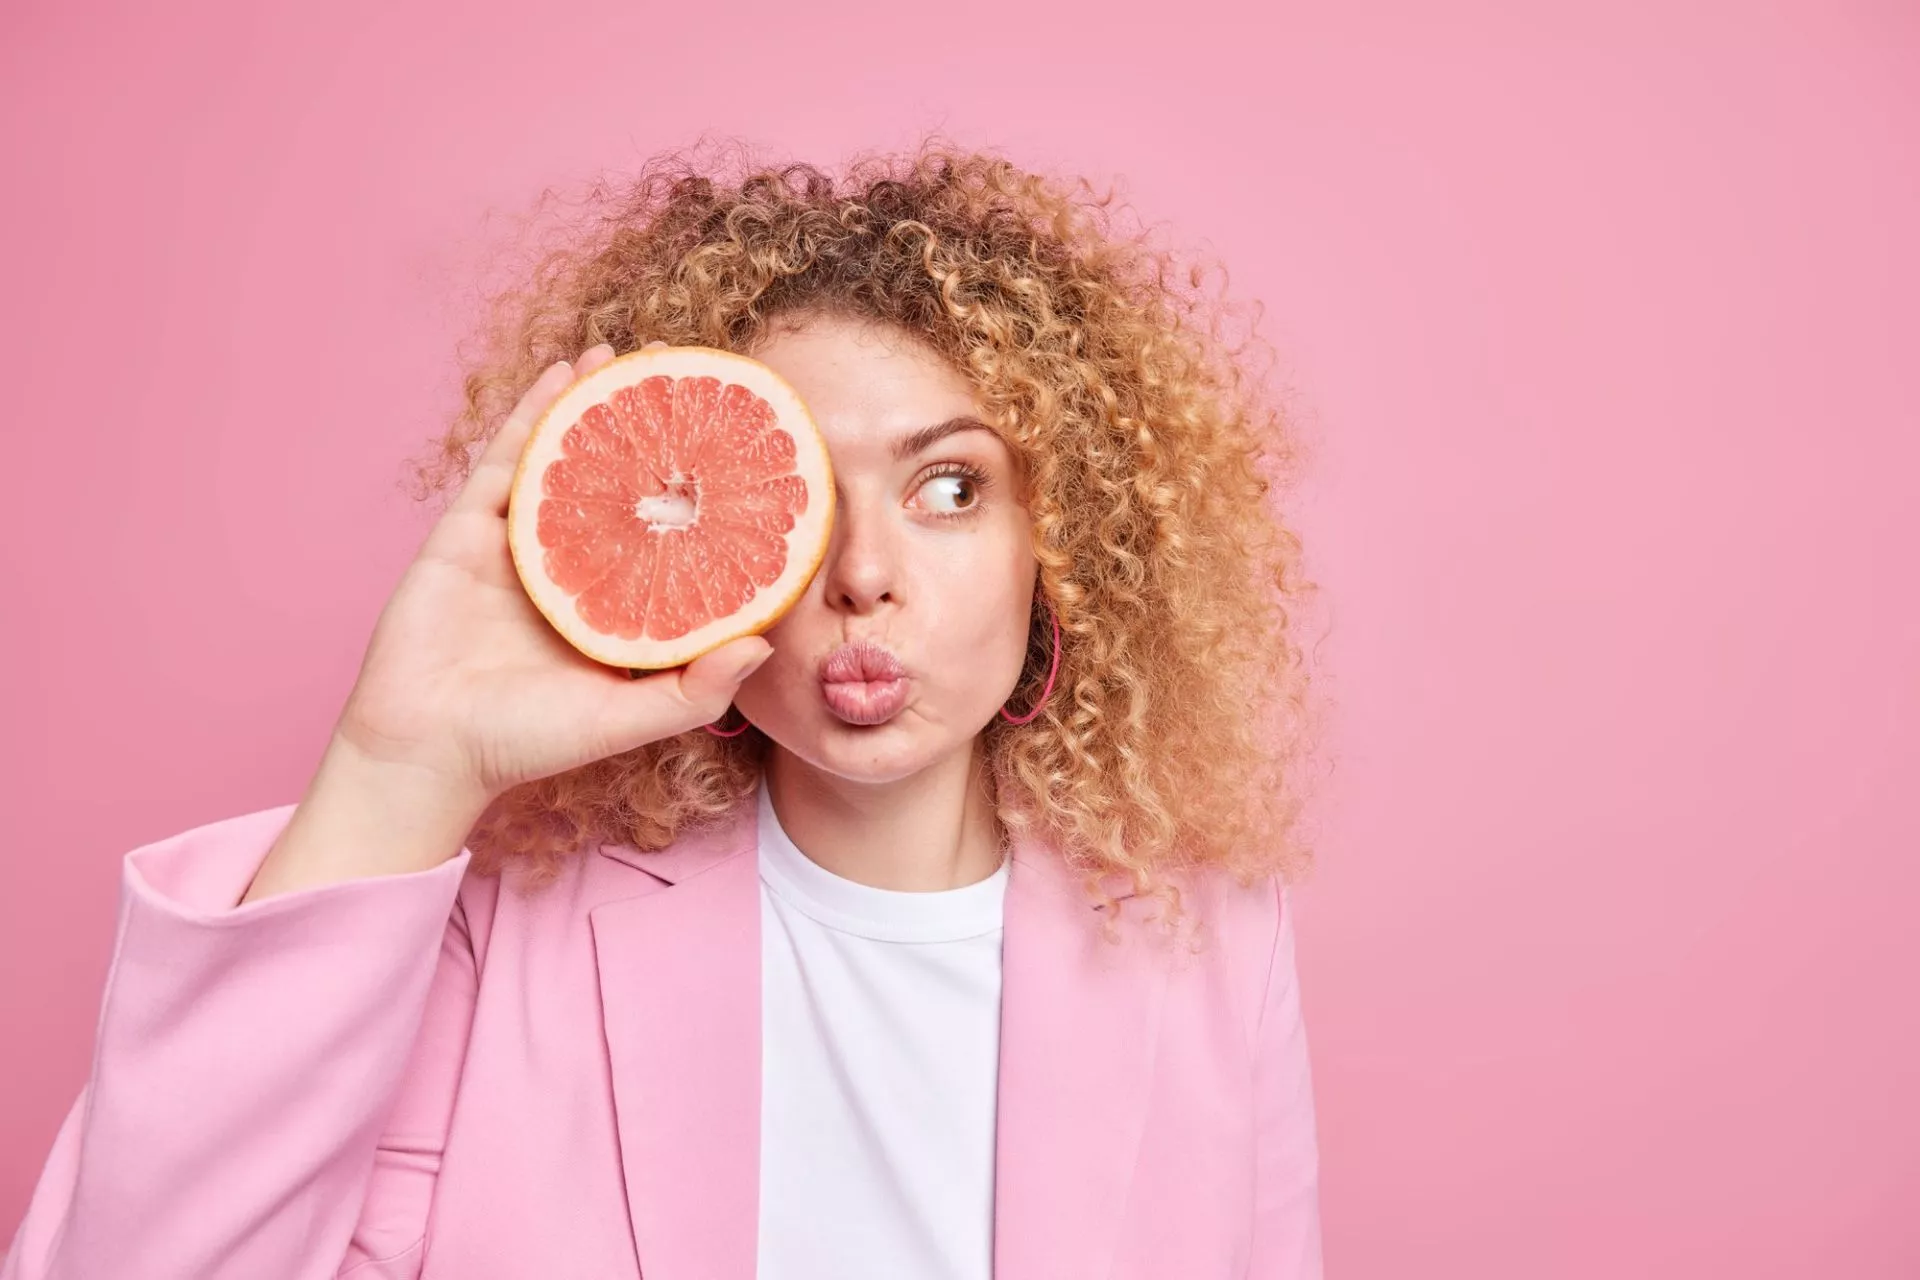 How to Eat Grapefruit to Lose Weight